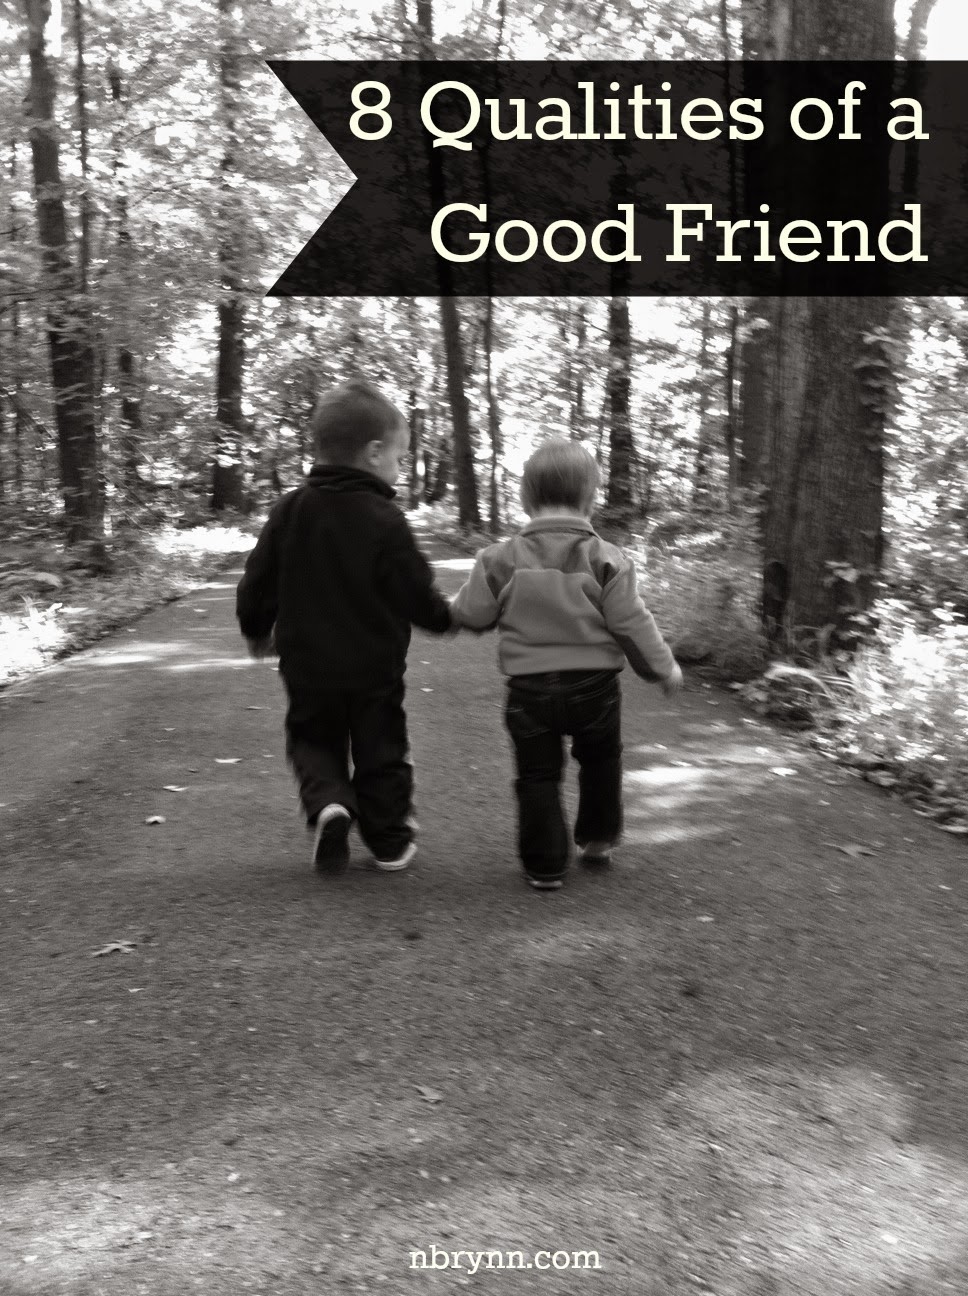 Are you a good friend?